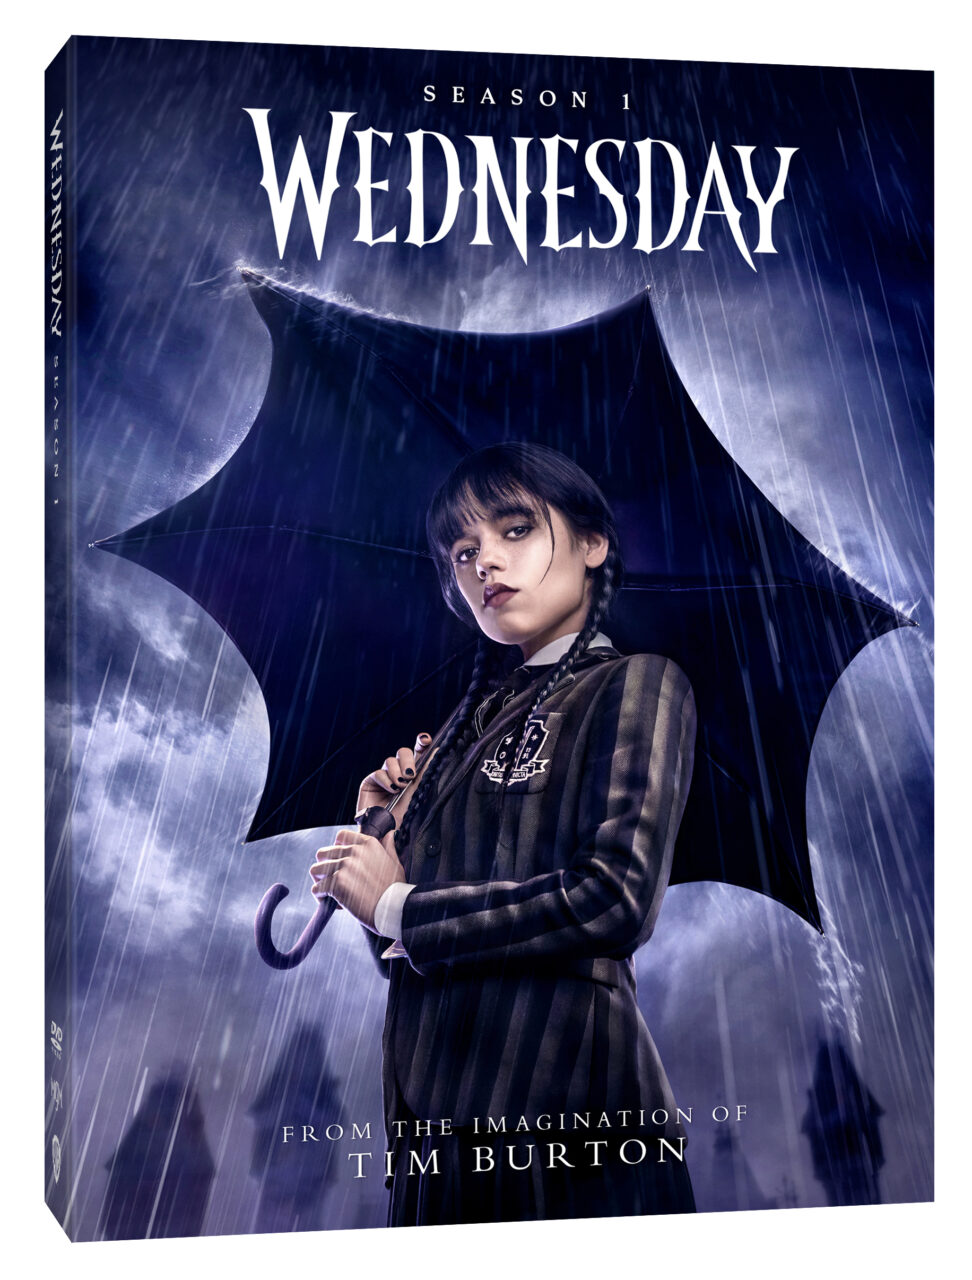 Wednesday: Season One DVD cover (Warner Bros. Discovery Home Entertainment)